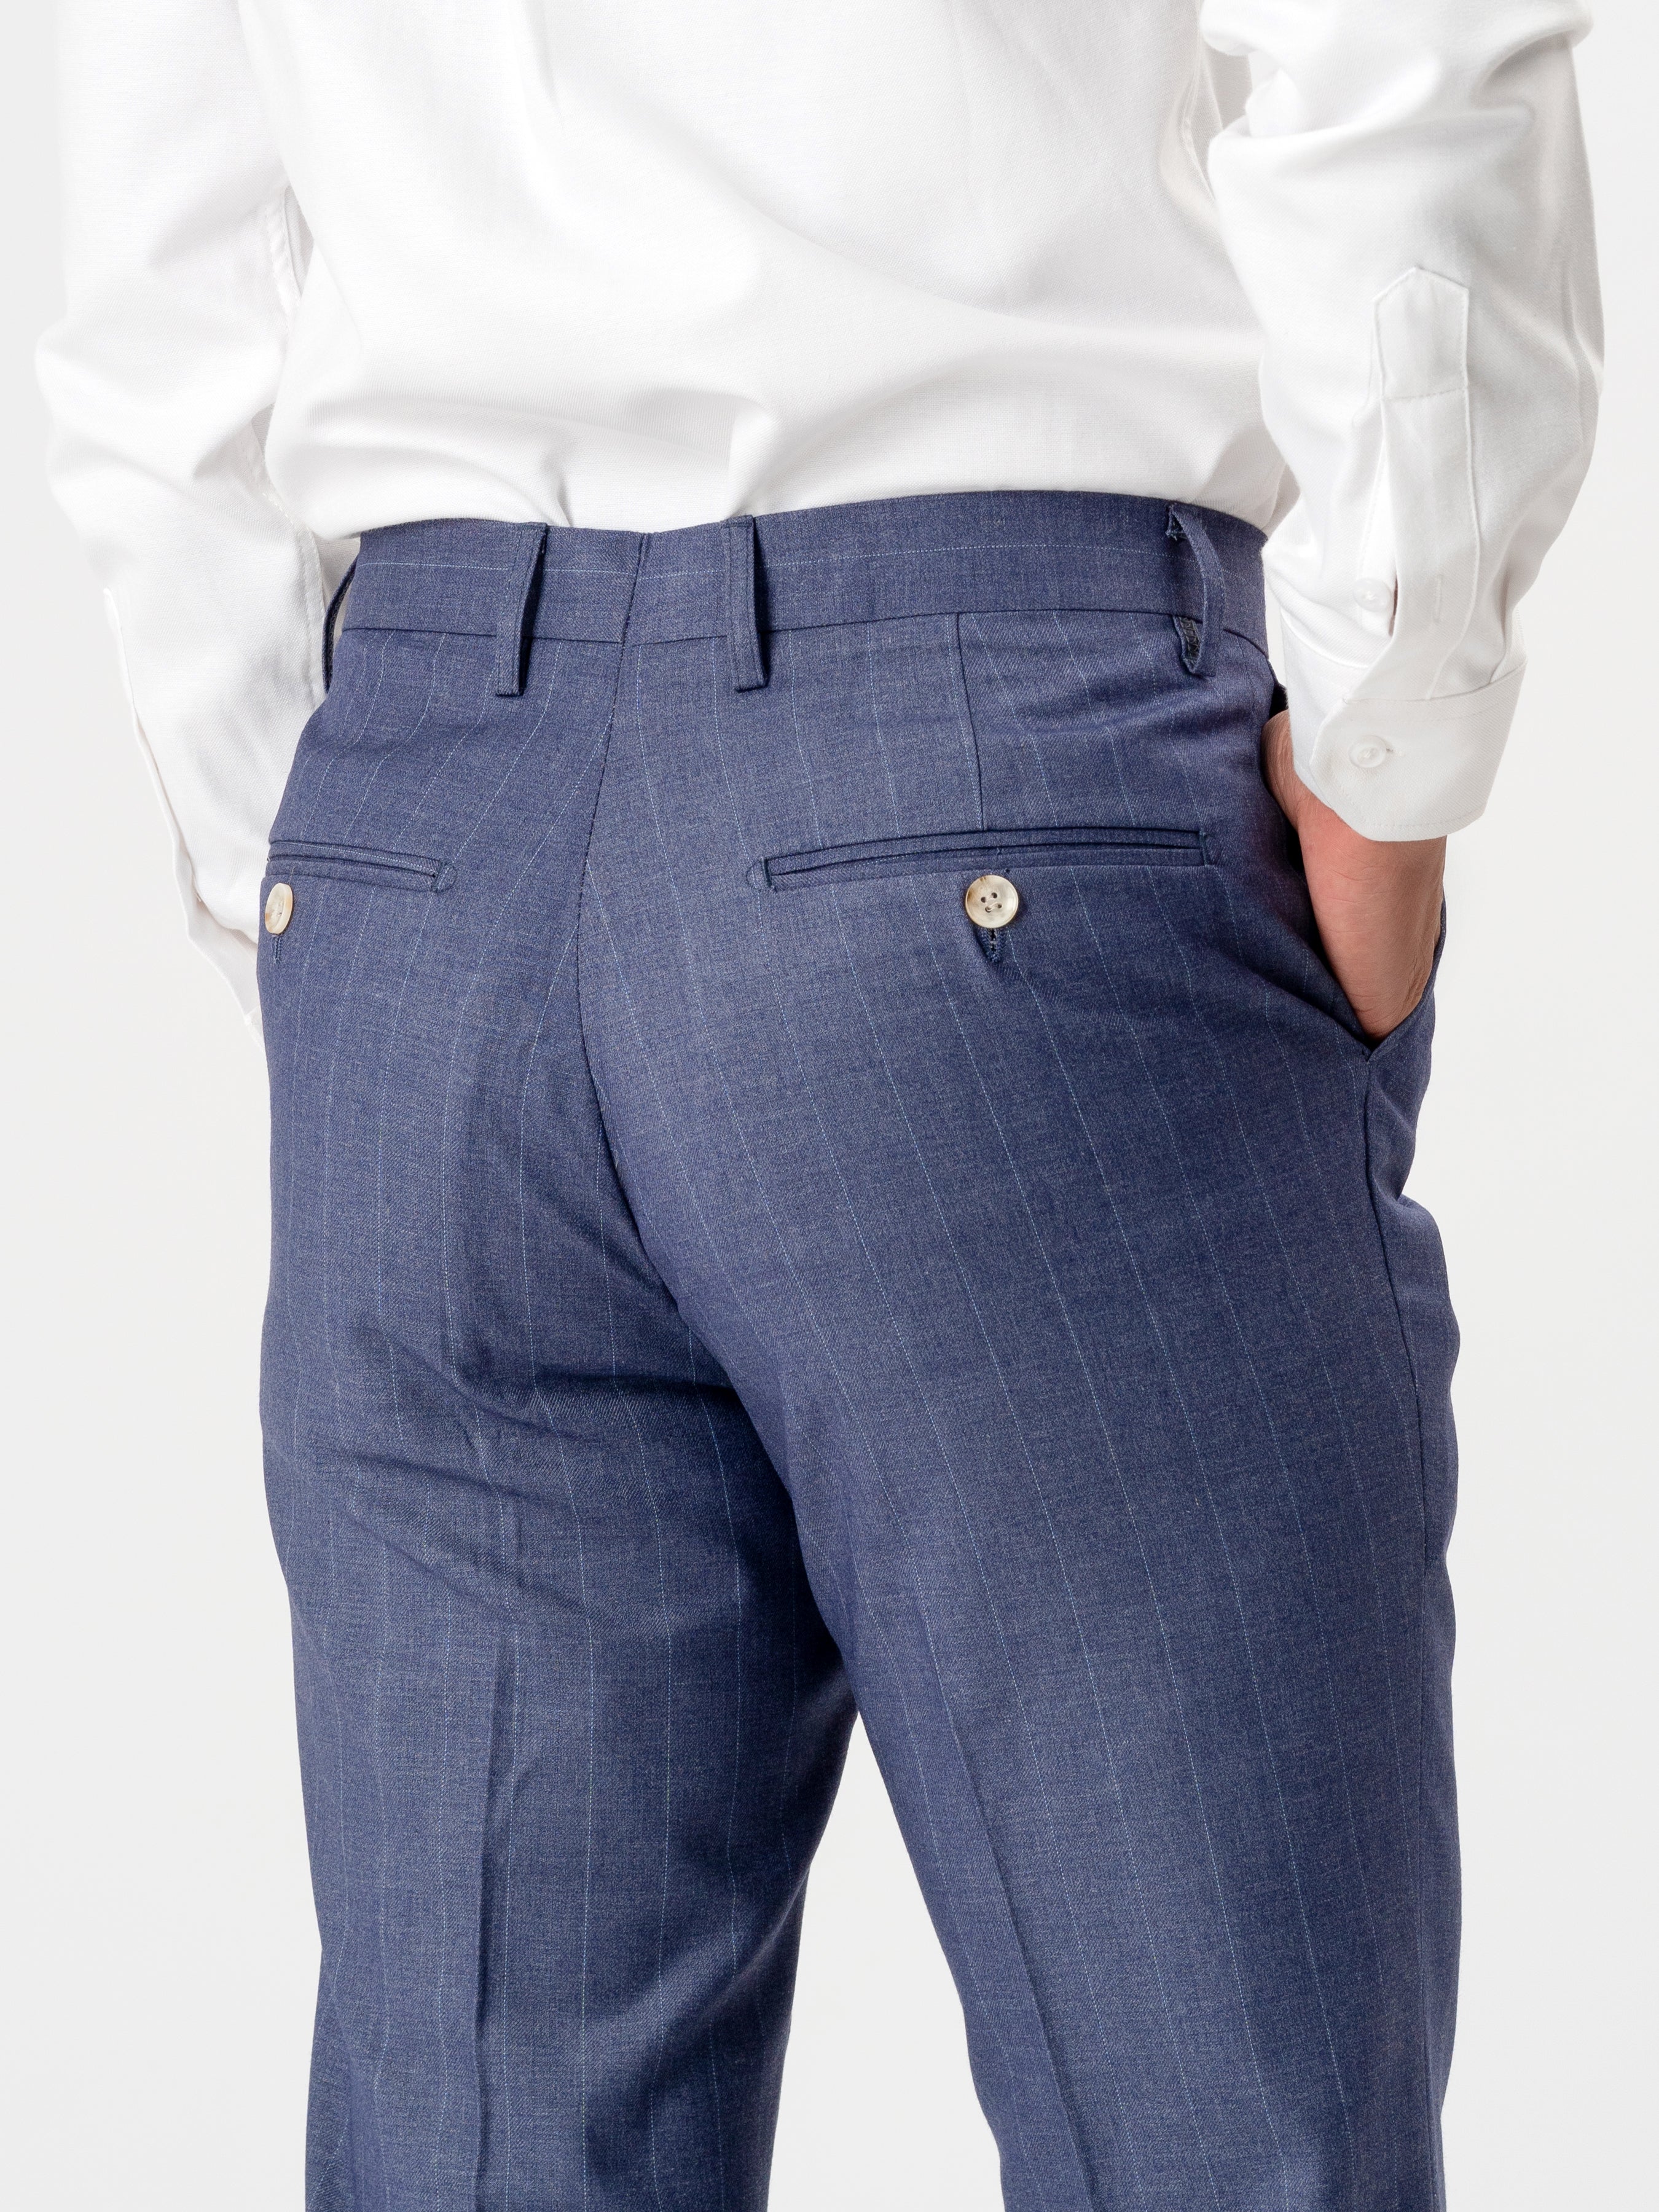 Trousers With Belt Loop - Iris Blue Stripes (Stretchable)